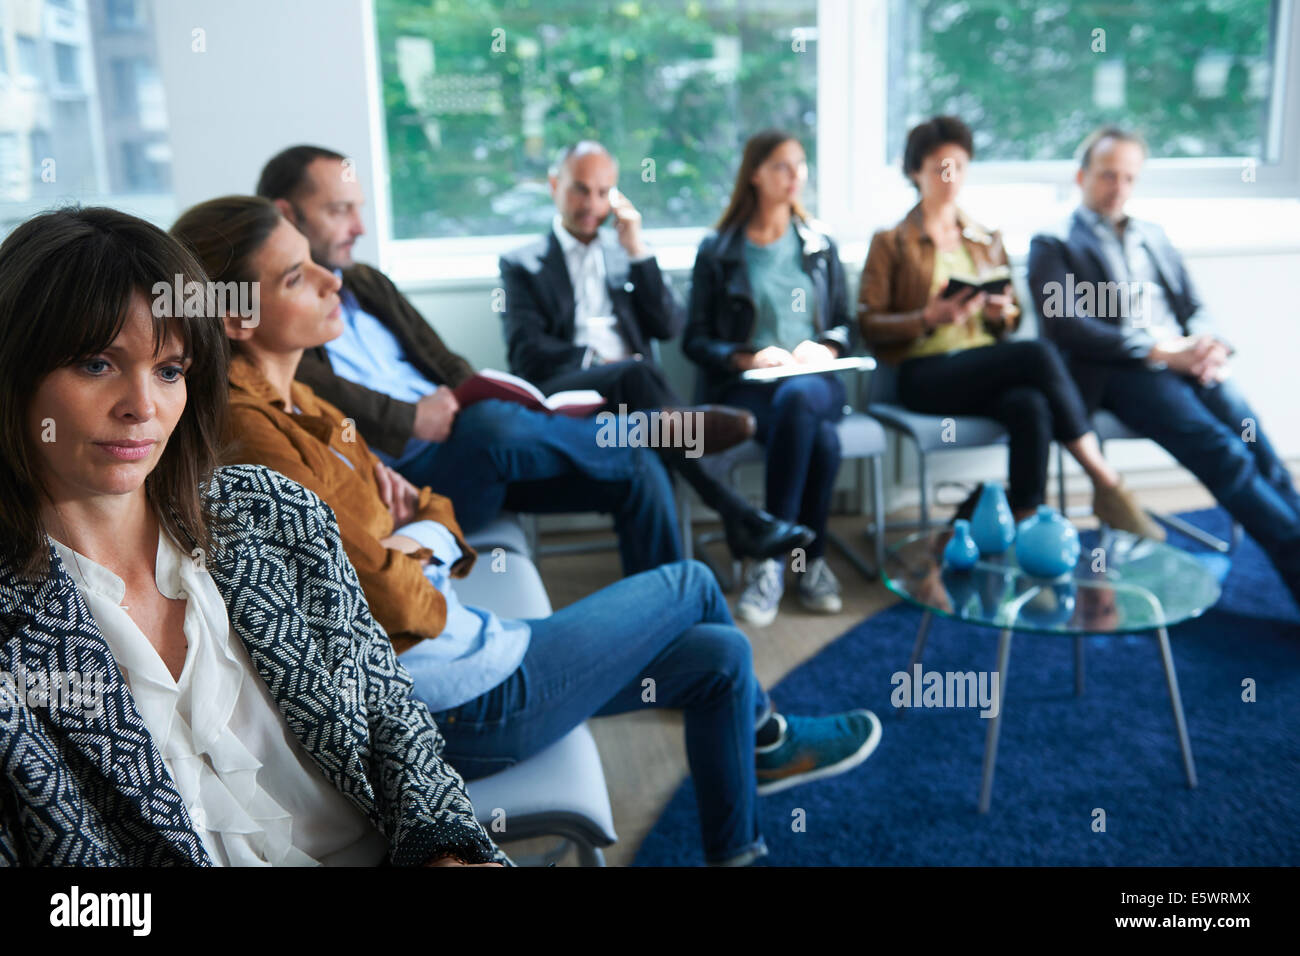 People sitting in waiting room Stock Photo